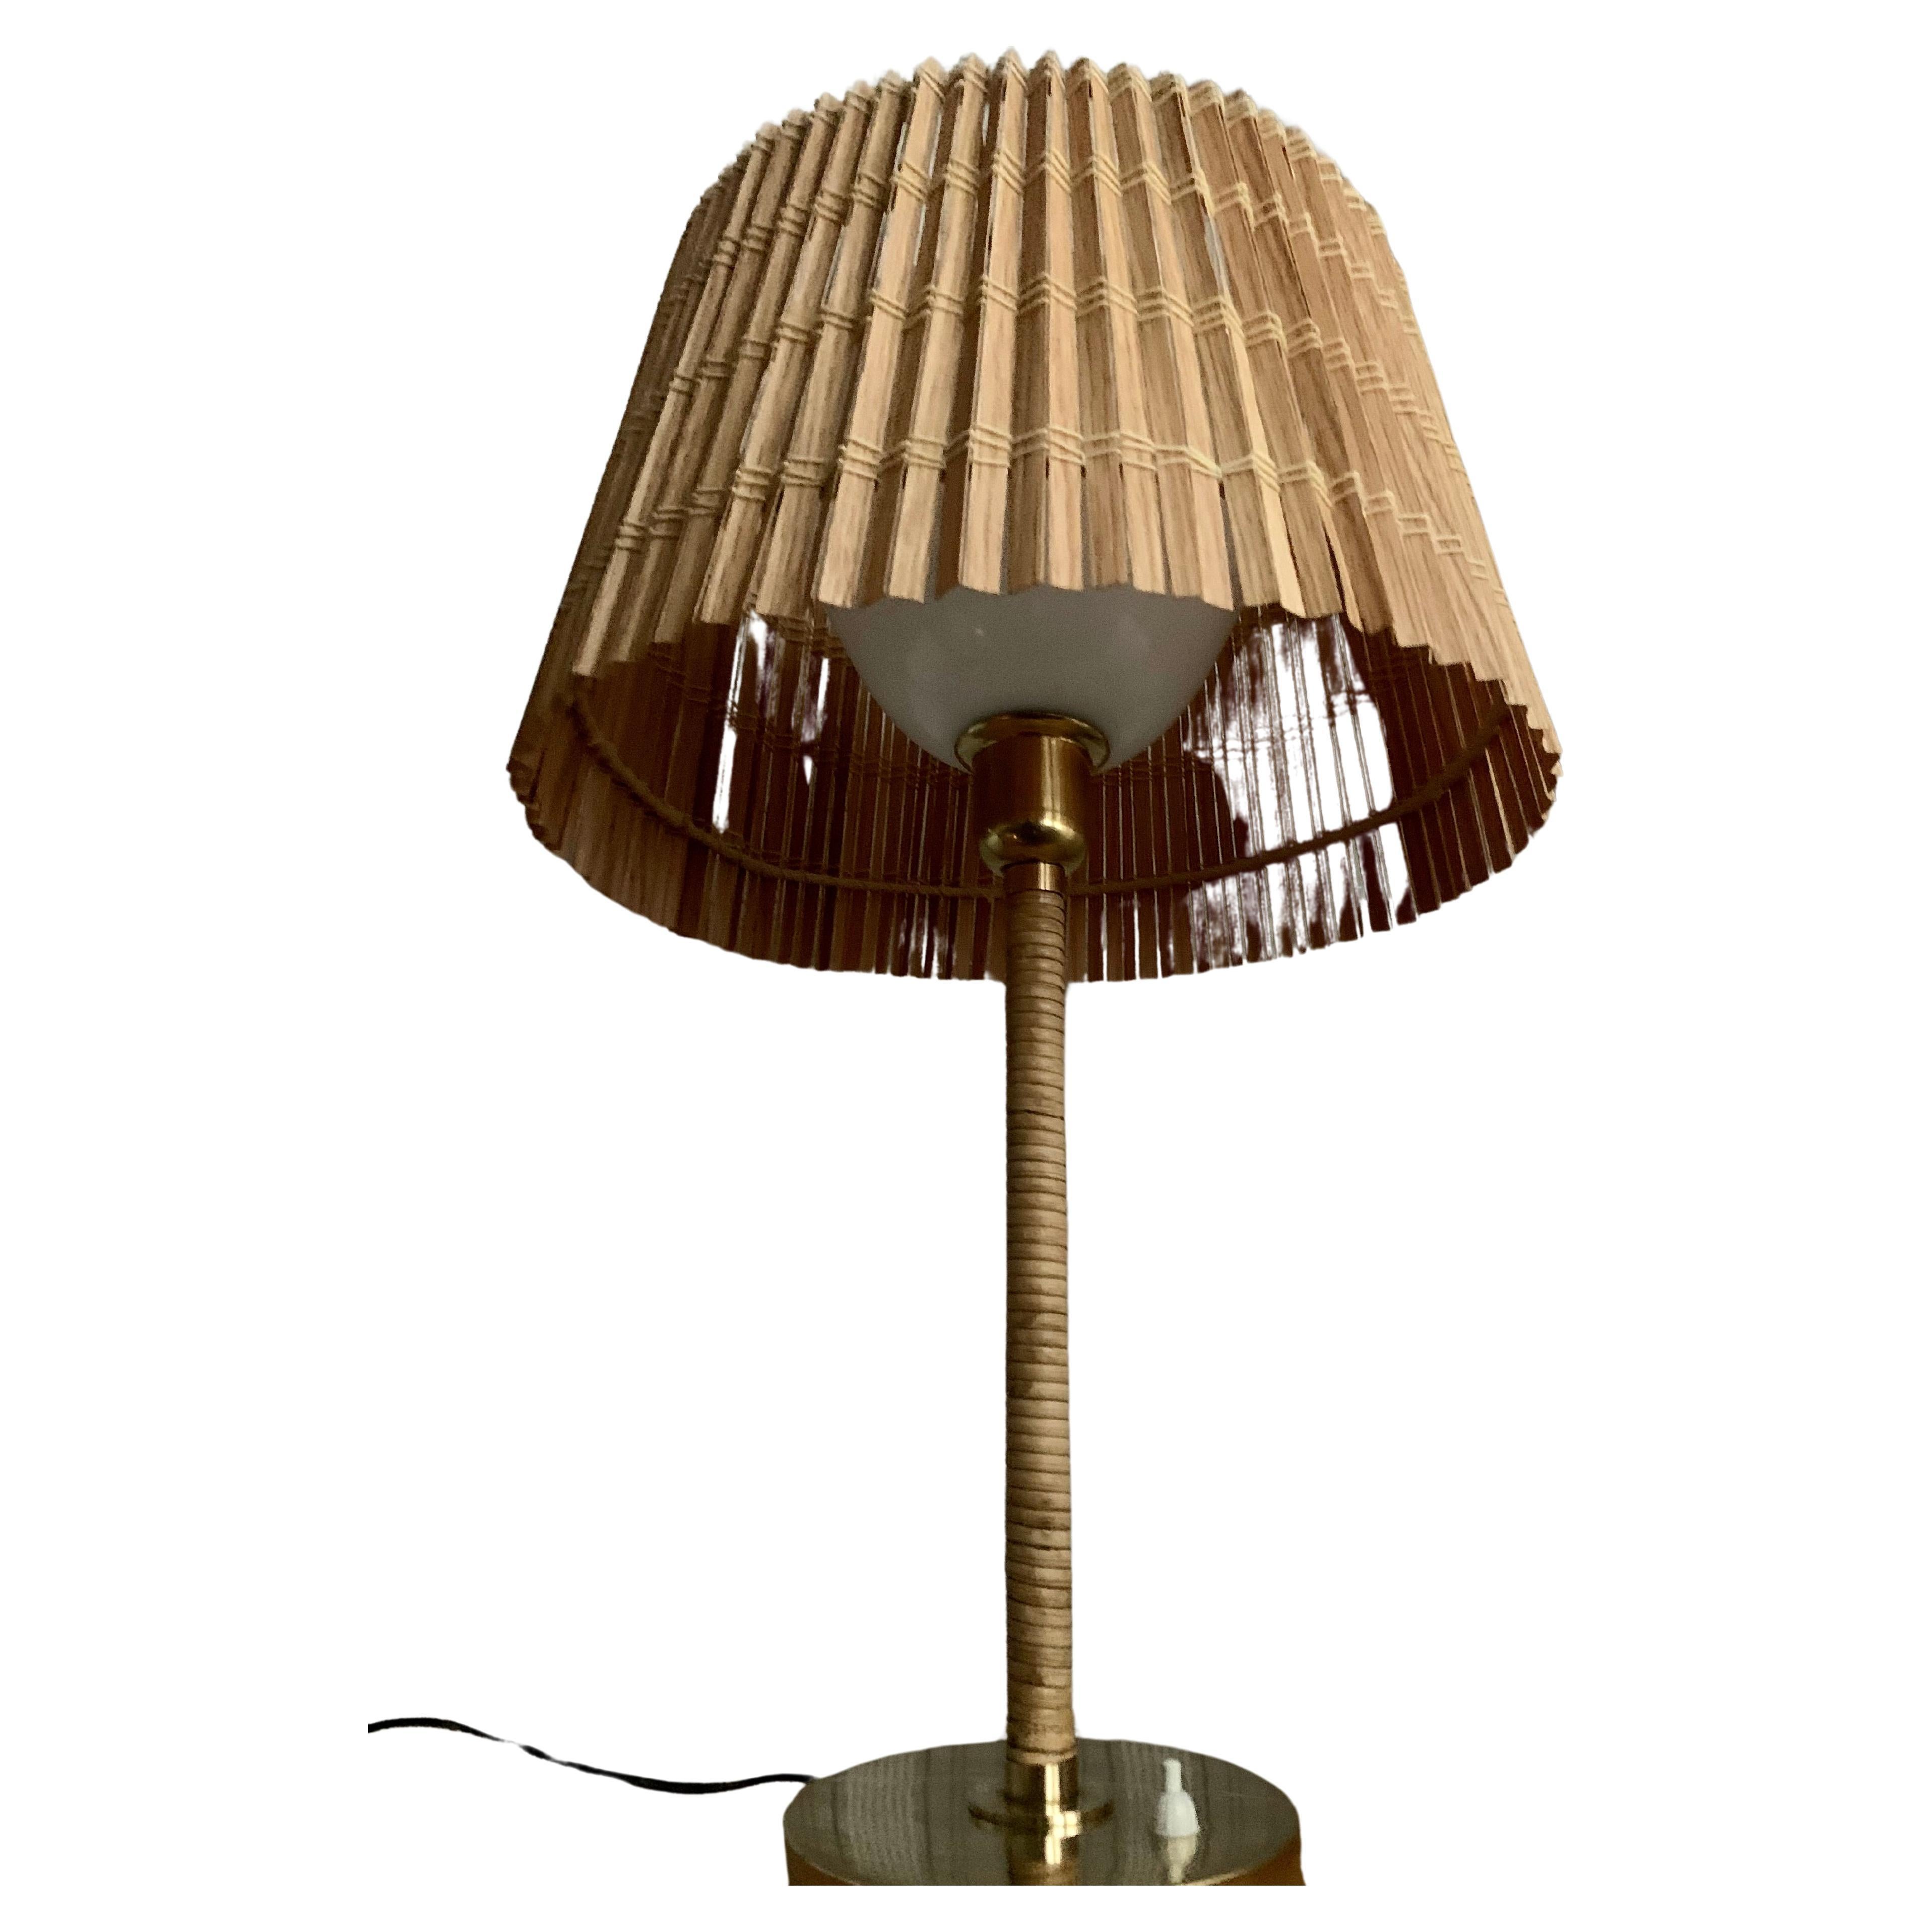 really impressive Finnish design lamp, materials brass and rattan. I shaded a spectacular wood slat. (aspen). This lamp is rare because Gunilla Jung worked only for a short time as a designer at ORNO